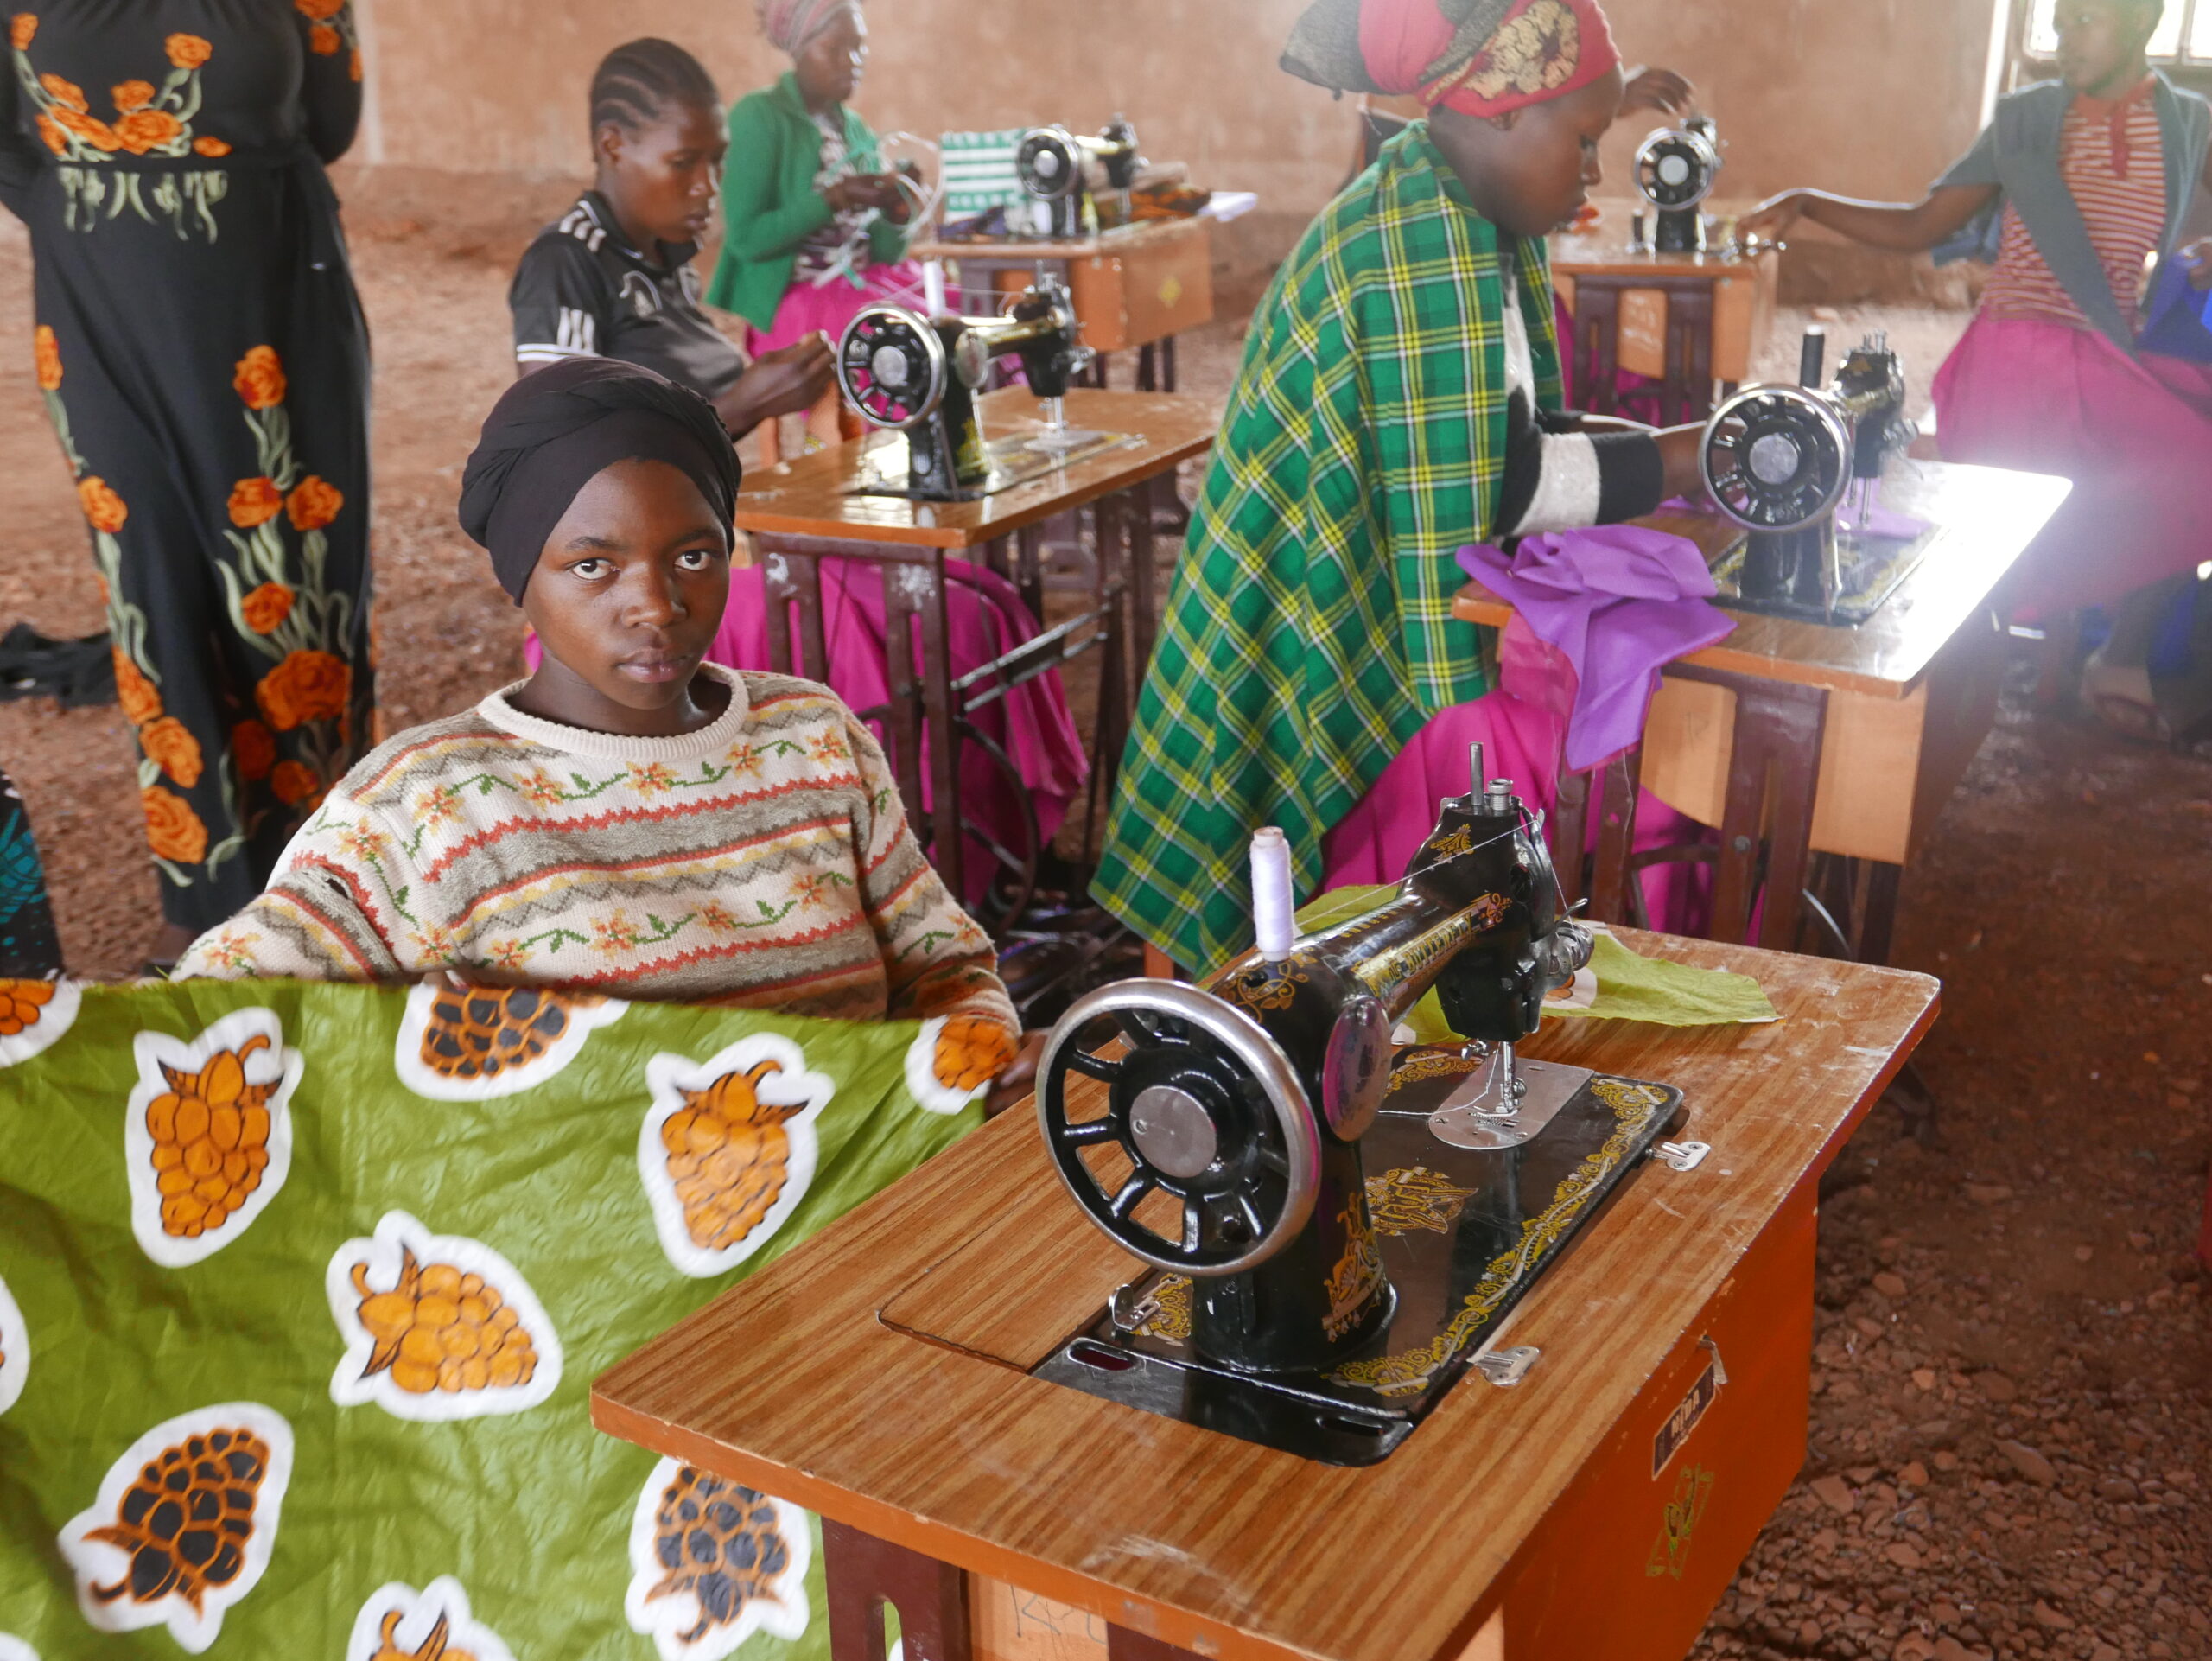 Vocational training at Musoma thanks to the Foundation